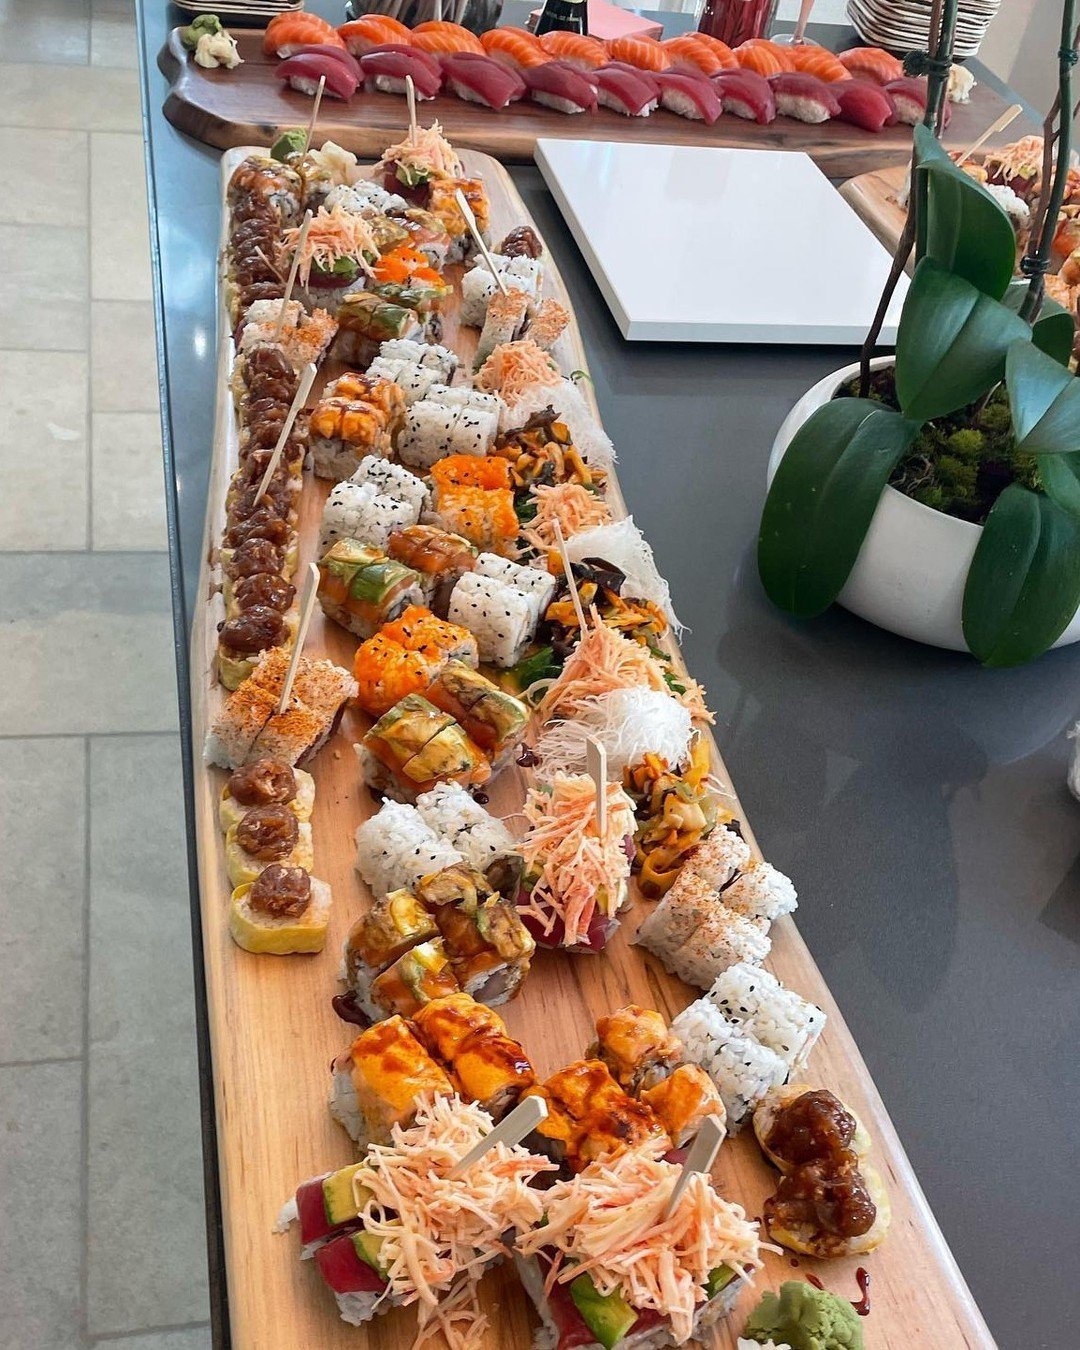 Your guests won't be bored of our sushi catering boards! Each one feeds up to 10 sushi lovers 😋 

Click the link in our bio for more details!